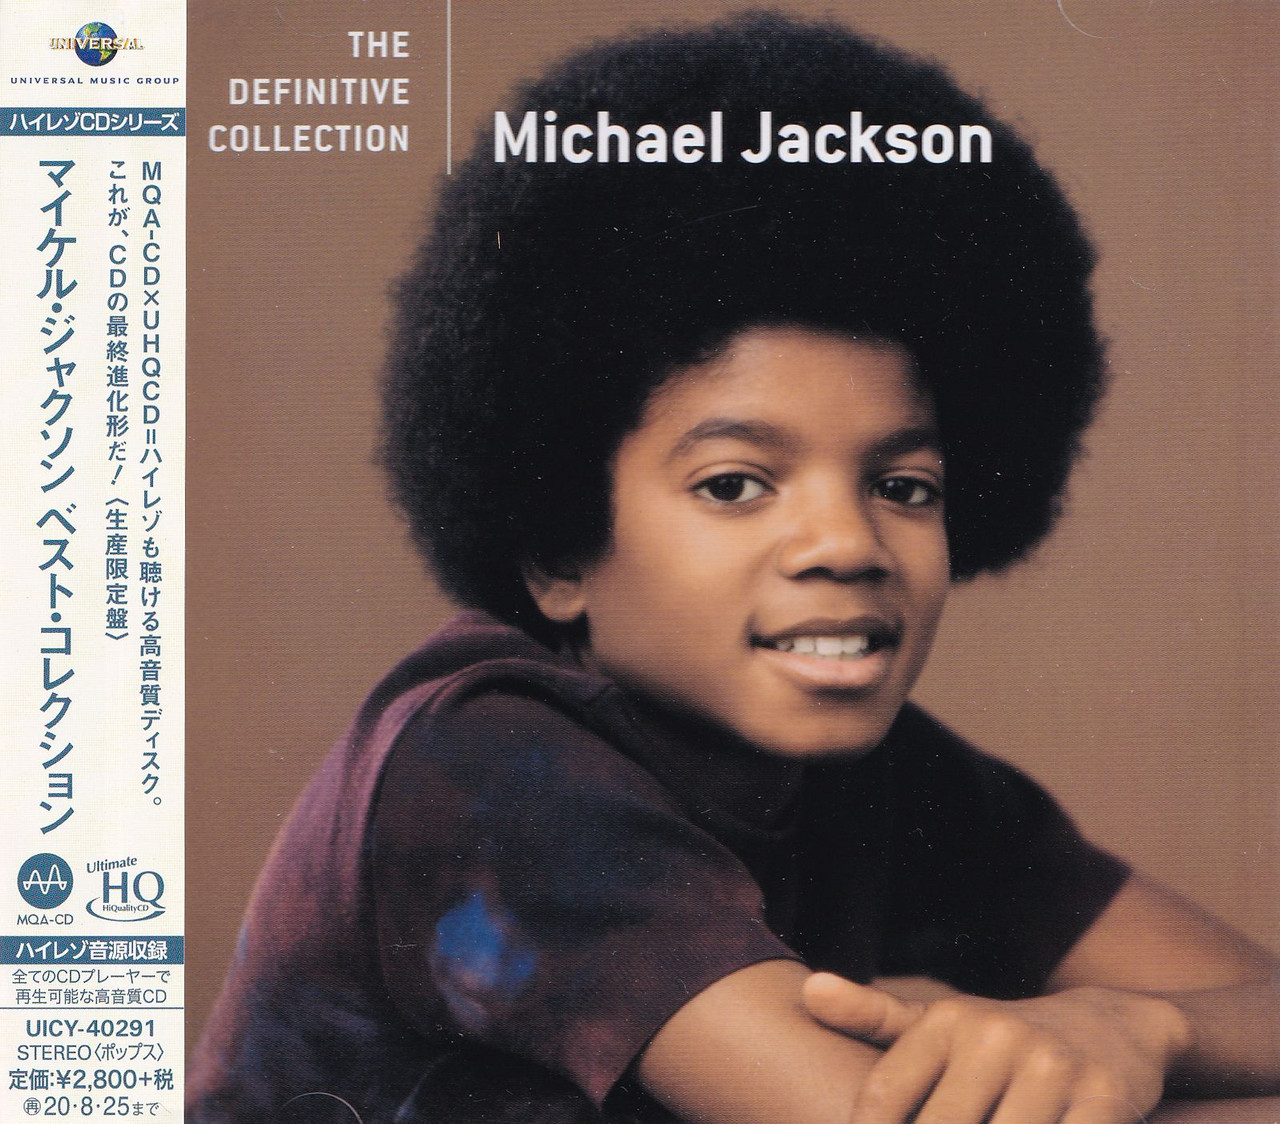 https://cdn11.bigcommerce.com/s-ope853byfp/images/stencil/1280x1280/products/4826/53462/Michael-Jackson-Definitive-Collection--MQA-UHQ-CD-Limited-Remastered-Universal-Music-UICY40291-front-cover__41673.1670346188.jpg?c=2